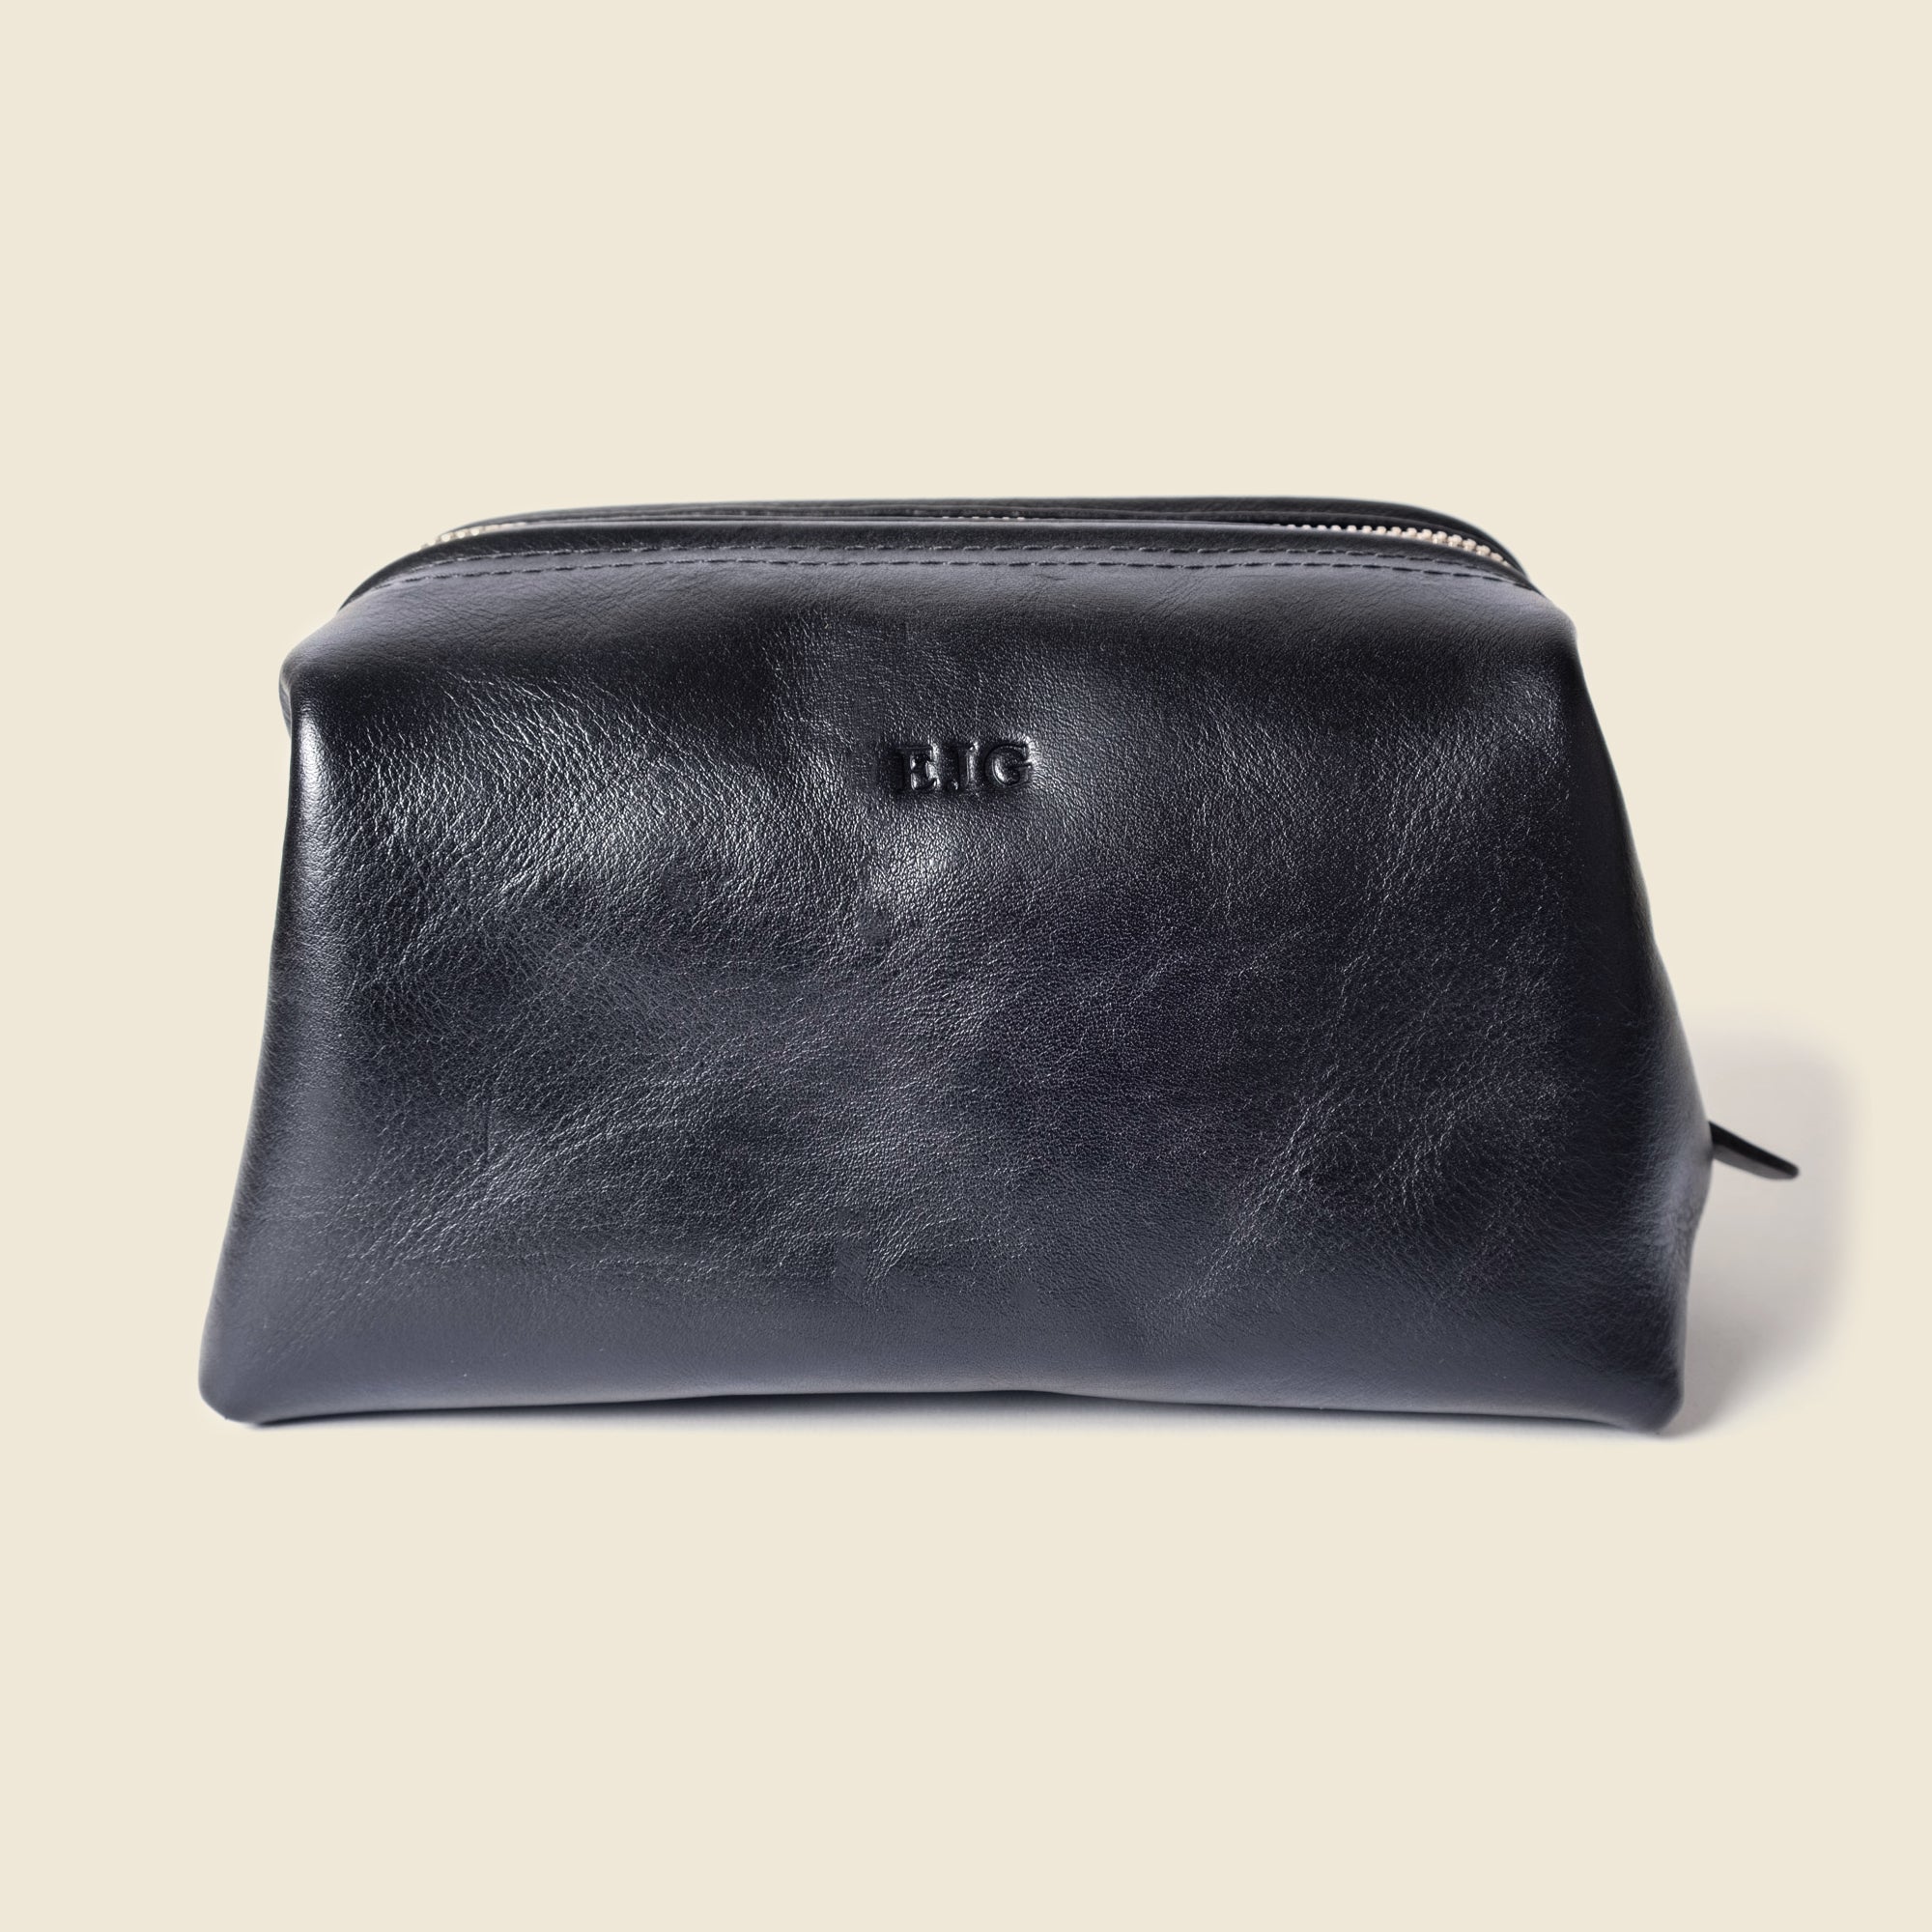 Toiletry bag with monogrammed initials